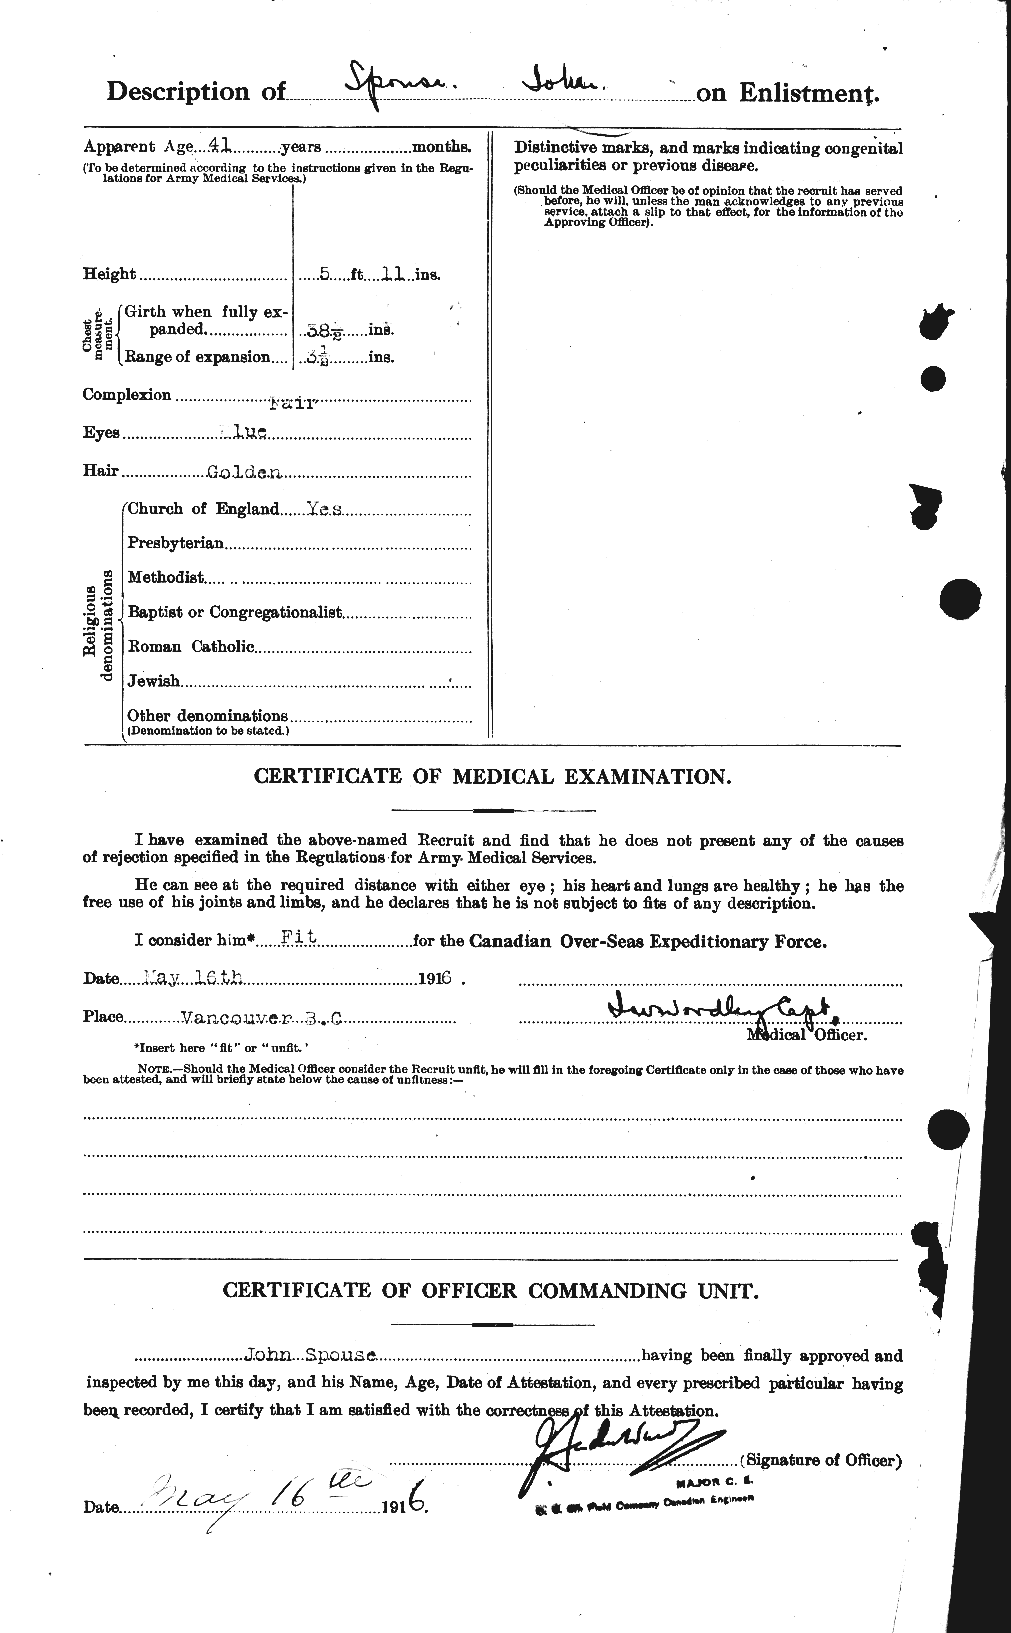 Personnel Records of the First World War - CEF 113205b